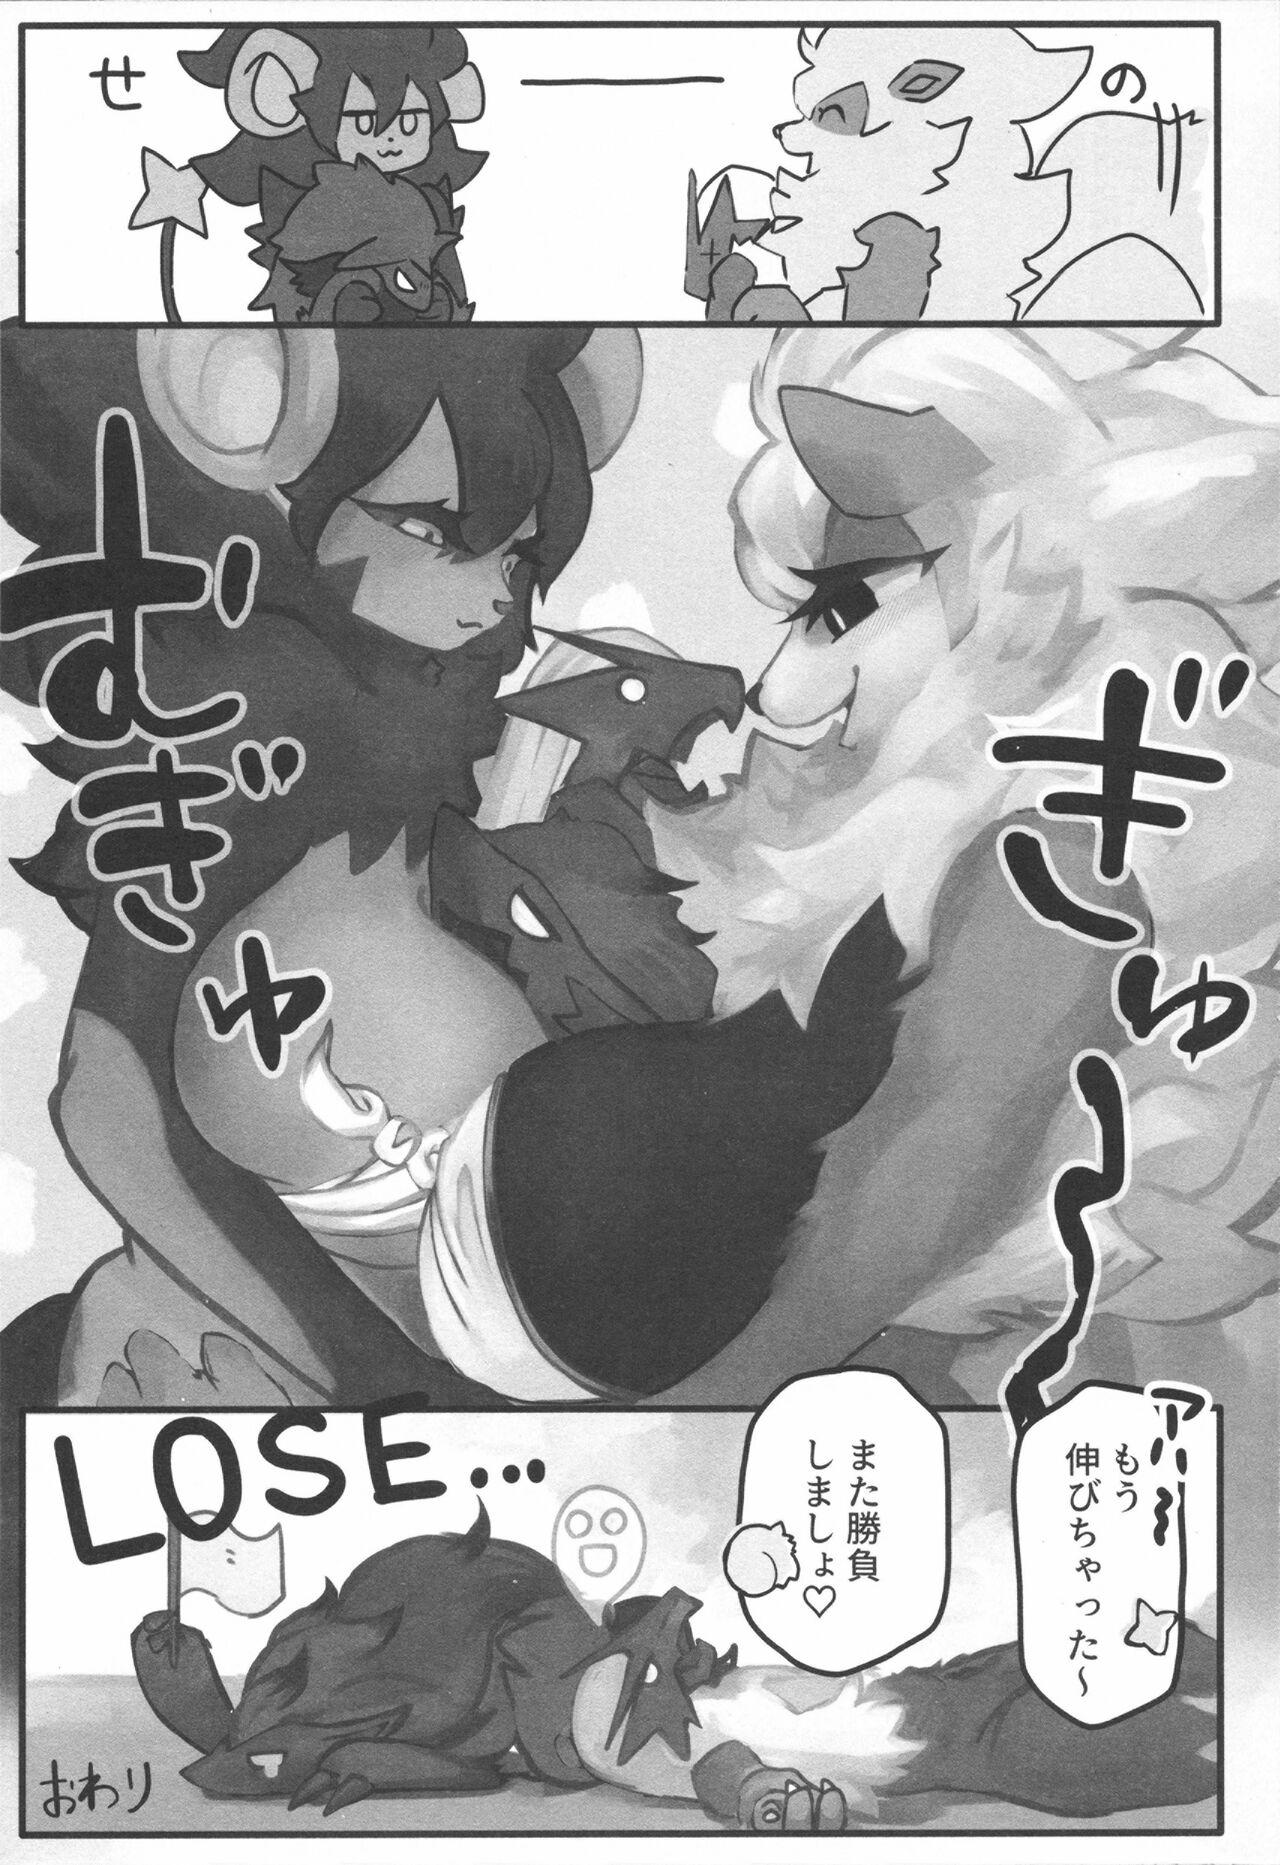 Public Sex Dominated 5 - Pokemon | pocket monsters Stud - Page 7